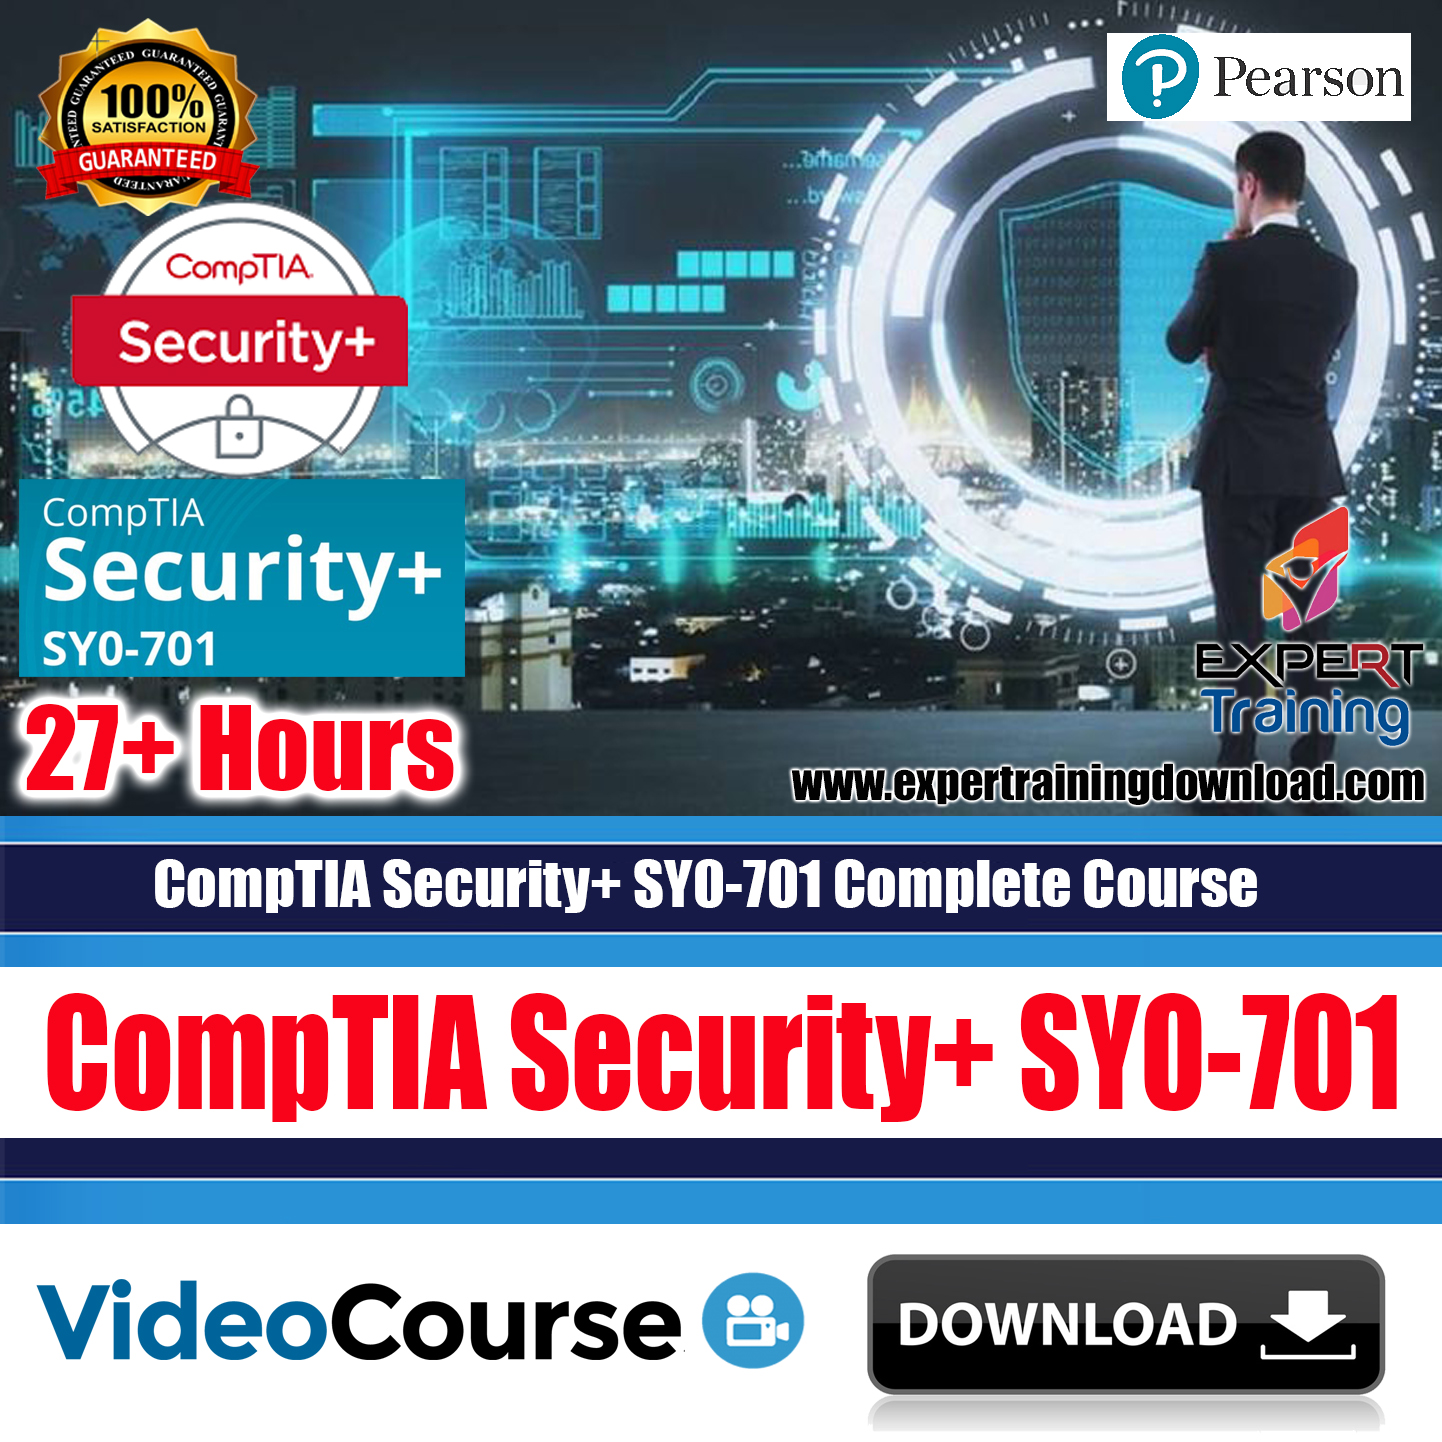 CompTIA Security+ SY0-701 Complete Course